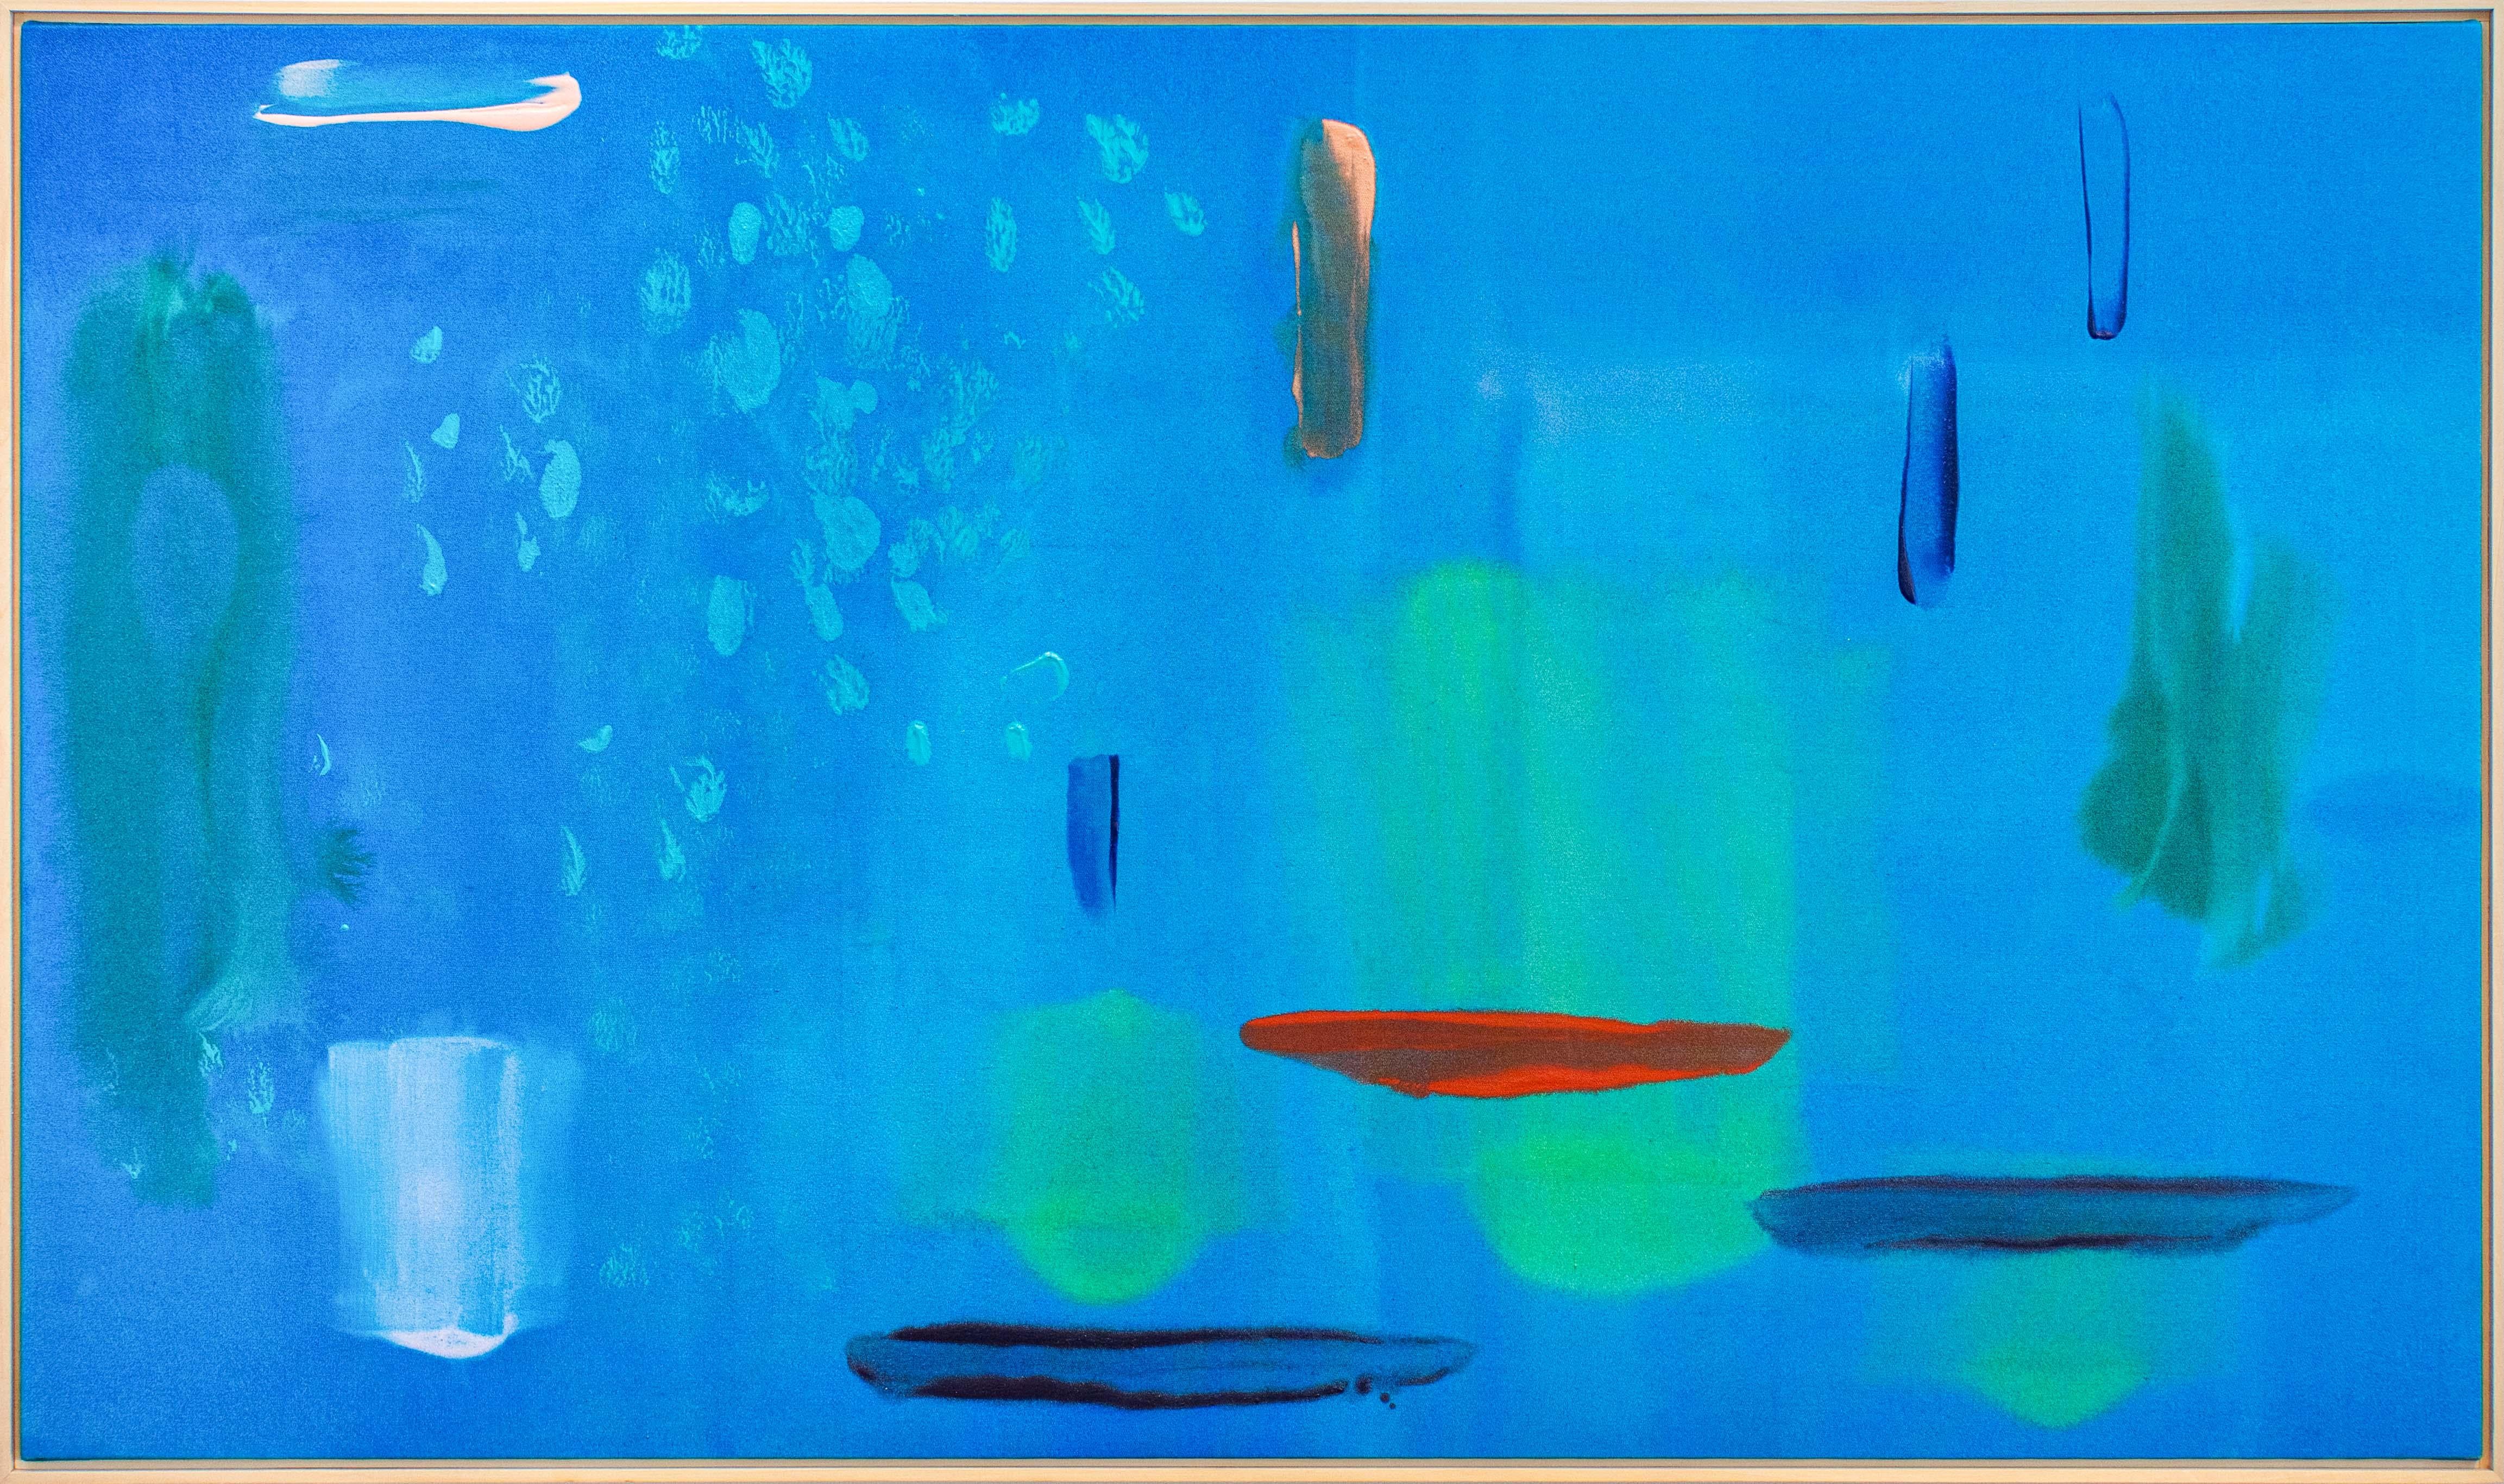 Blue Lagoon - large, colourful, modernist, gestural abstract, acrylic on canvas - Painting by Milly Ristvedt